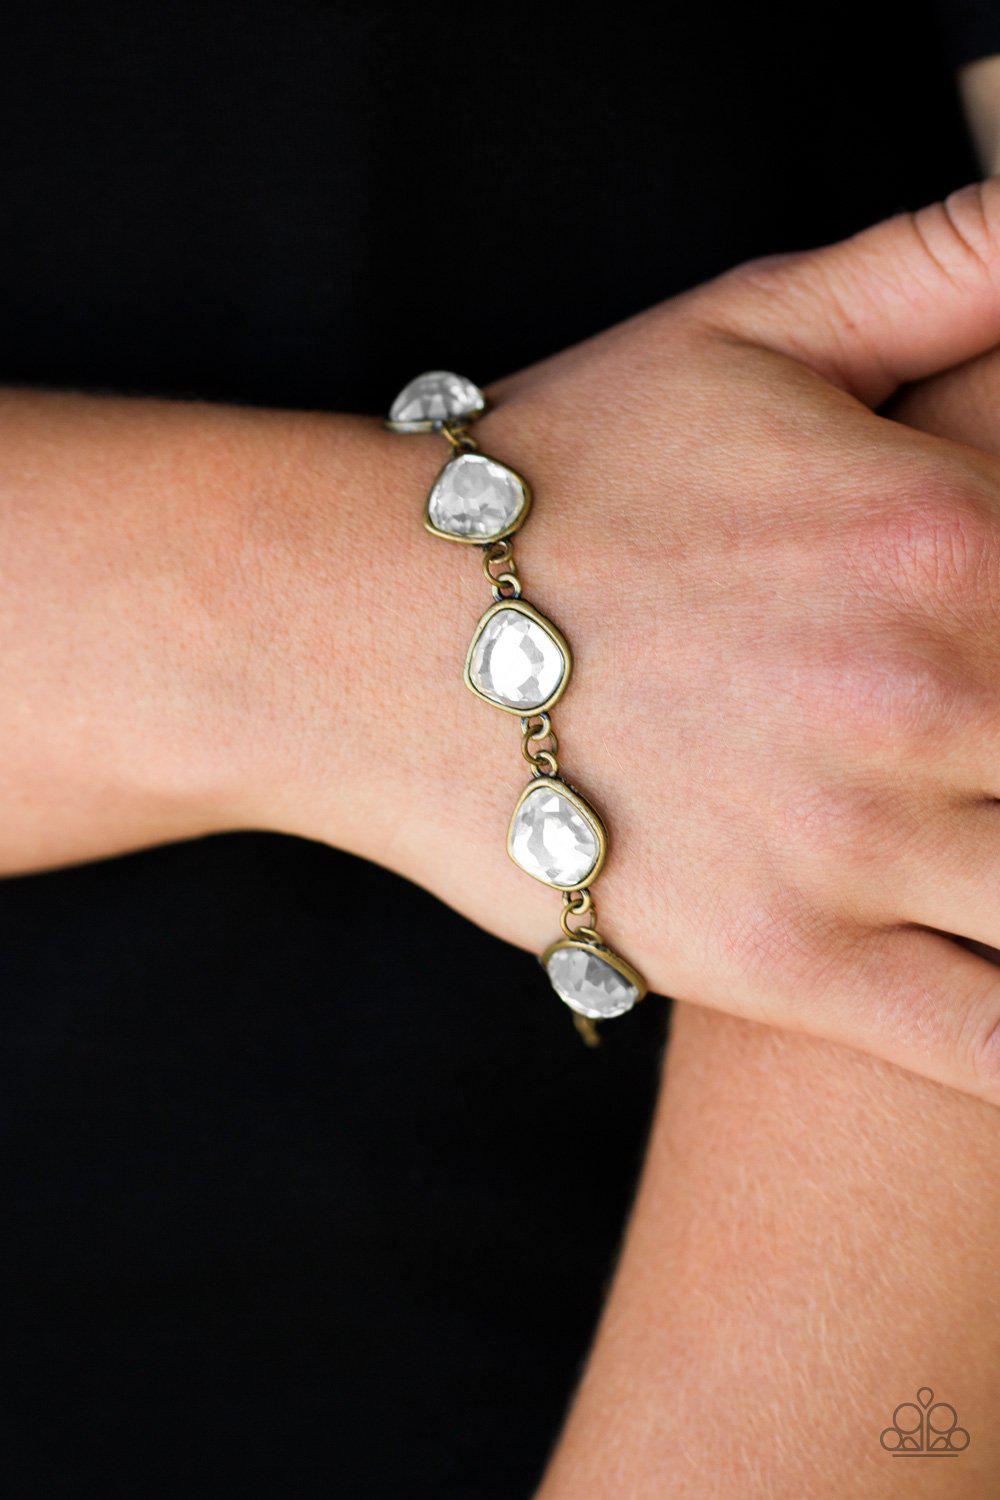 Perfect Imperfection Brass and White Rhinestone Bracelet - Paparazzi Accessories- model - CarasShop.com - $5 Jewelry by Cara Jewels